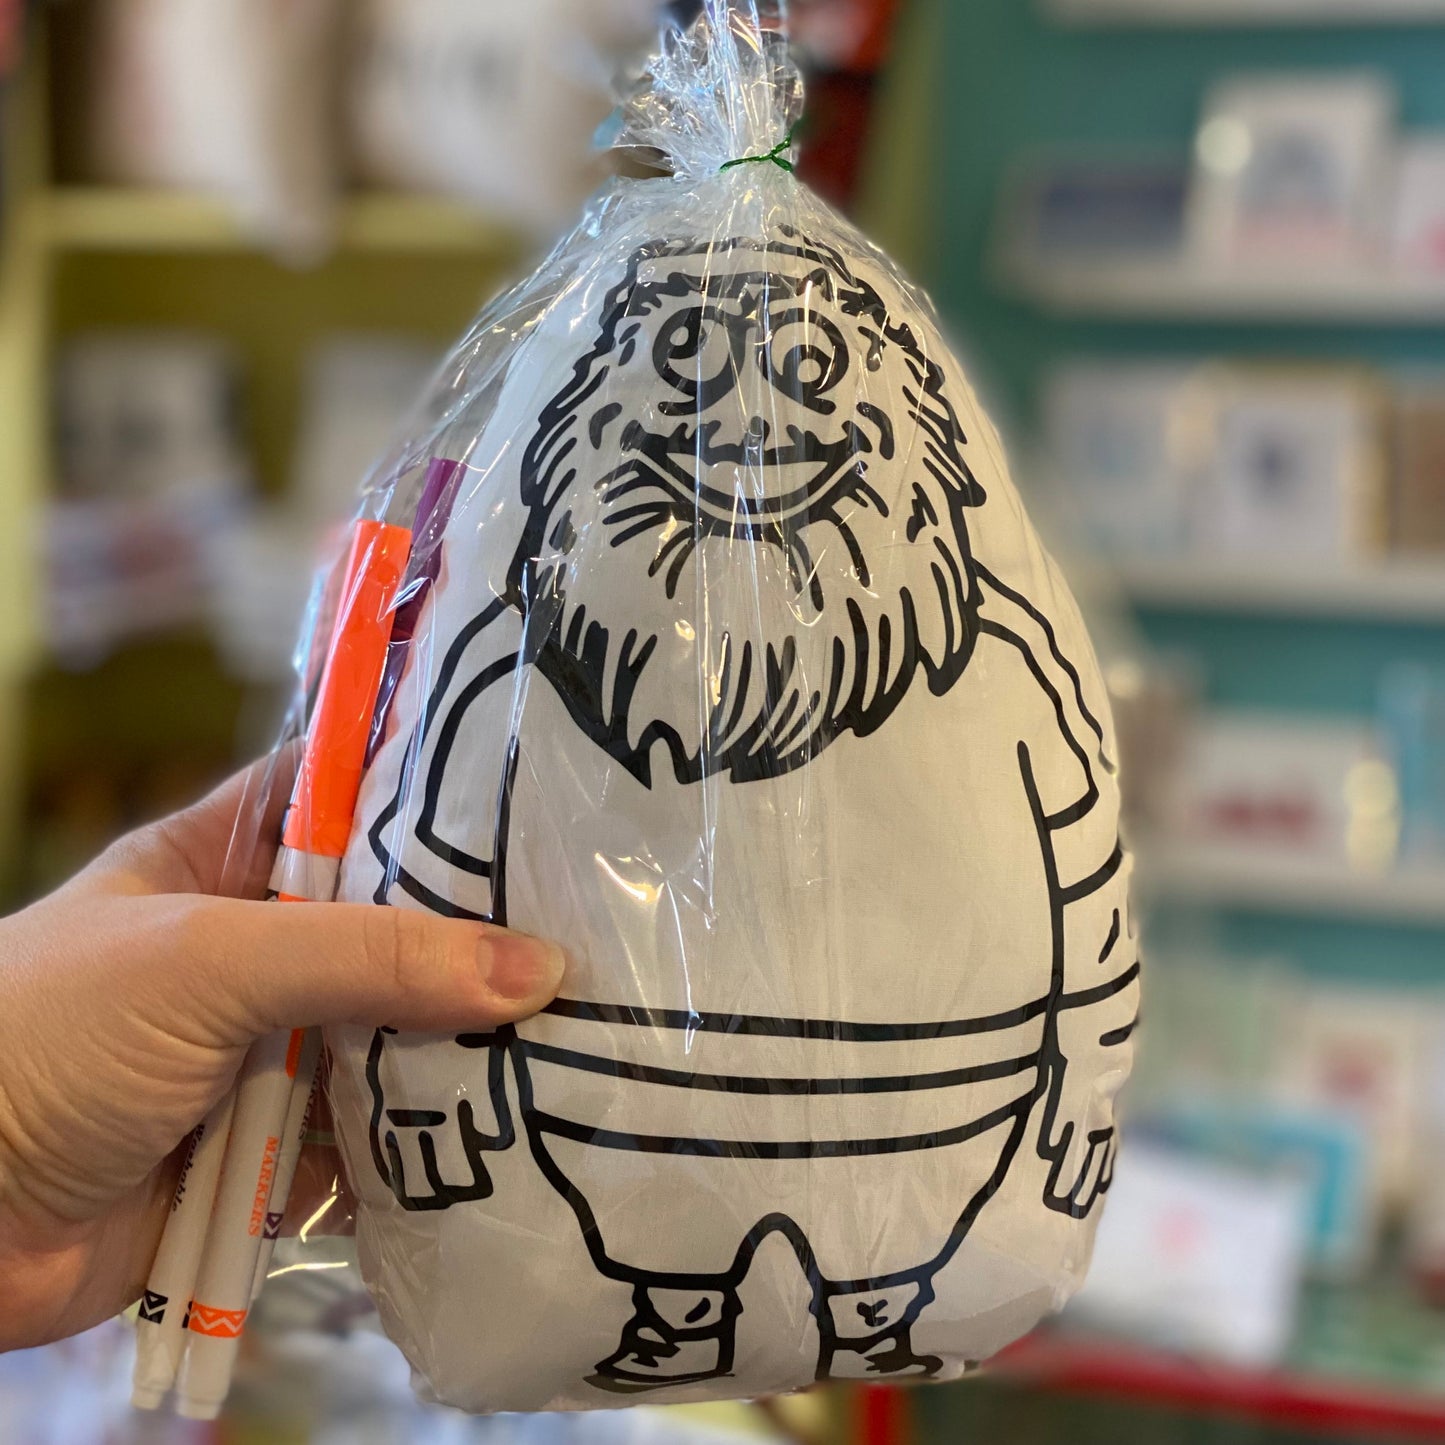 A hand holding a packaged Washable Kits inflatable toy with a printed design of the Gritty, in a retail store setting by Doodle Jawnz.